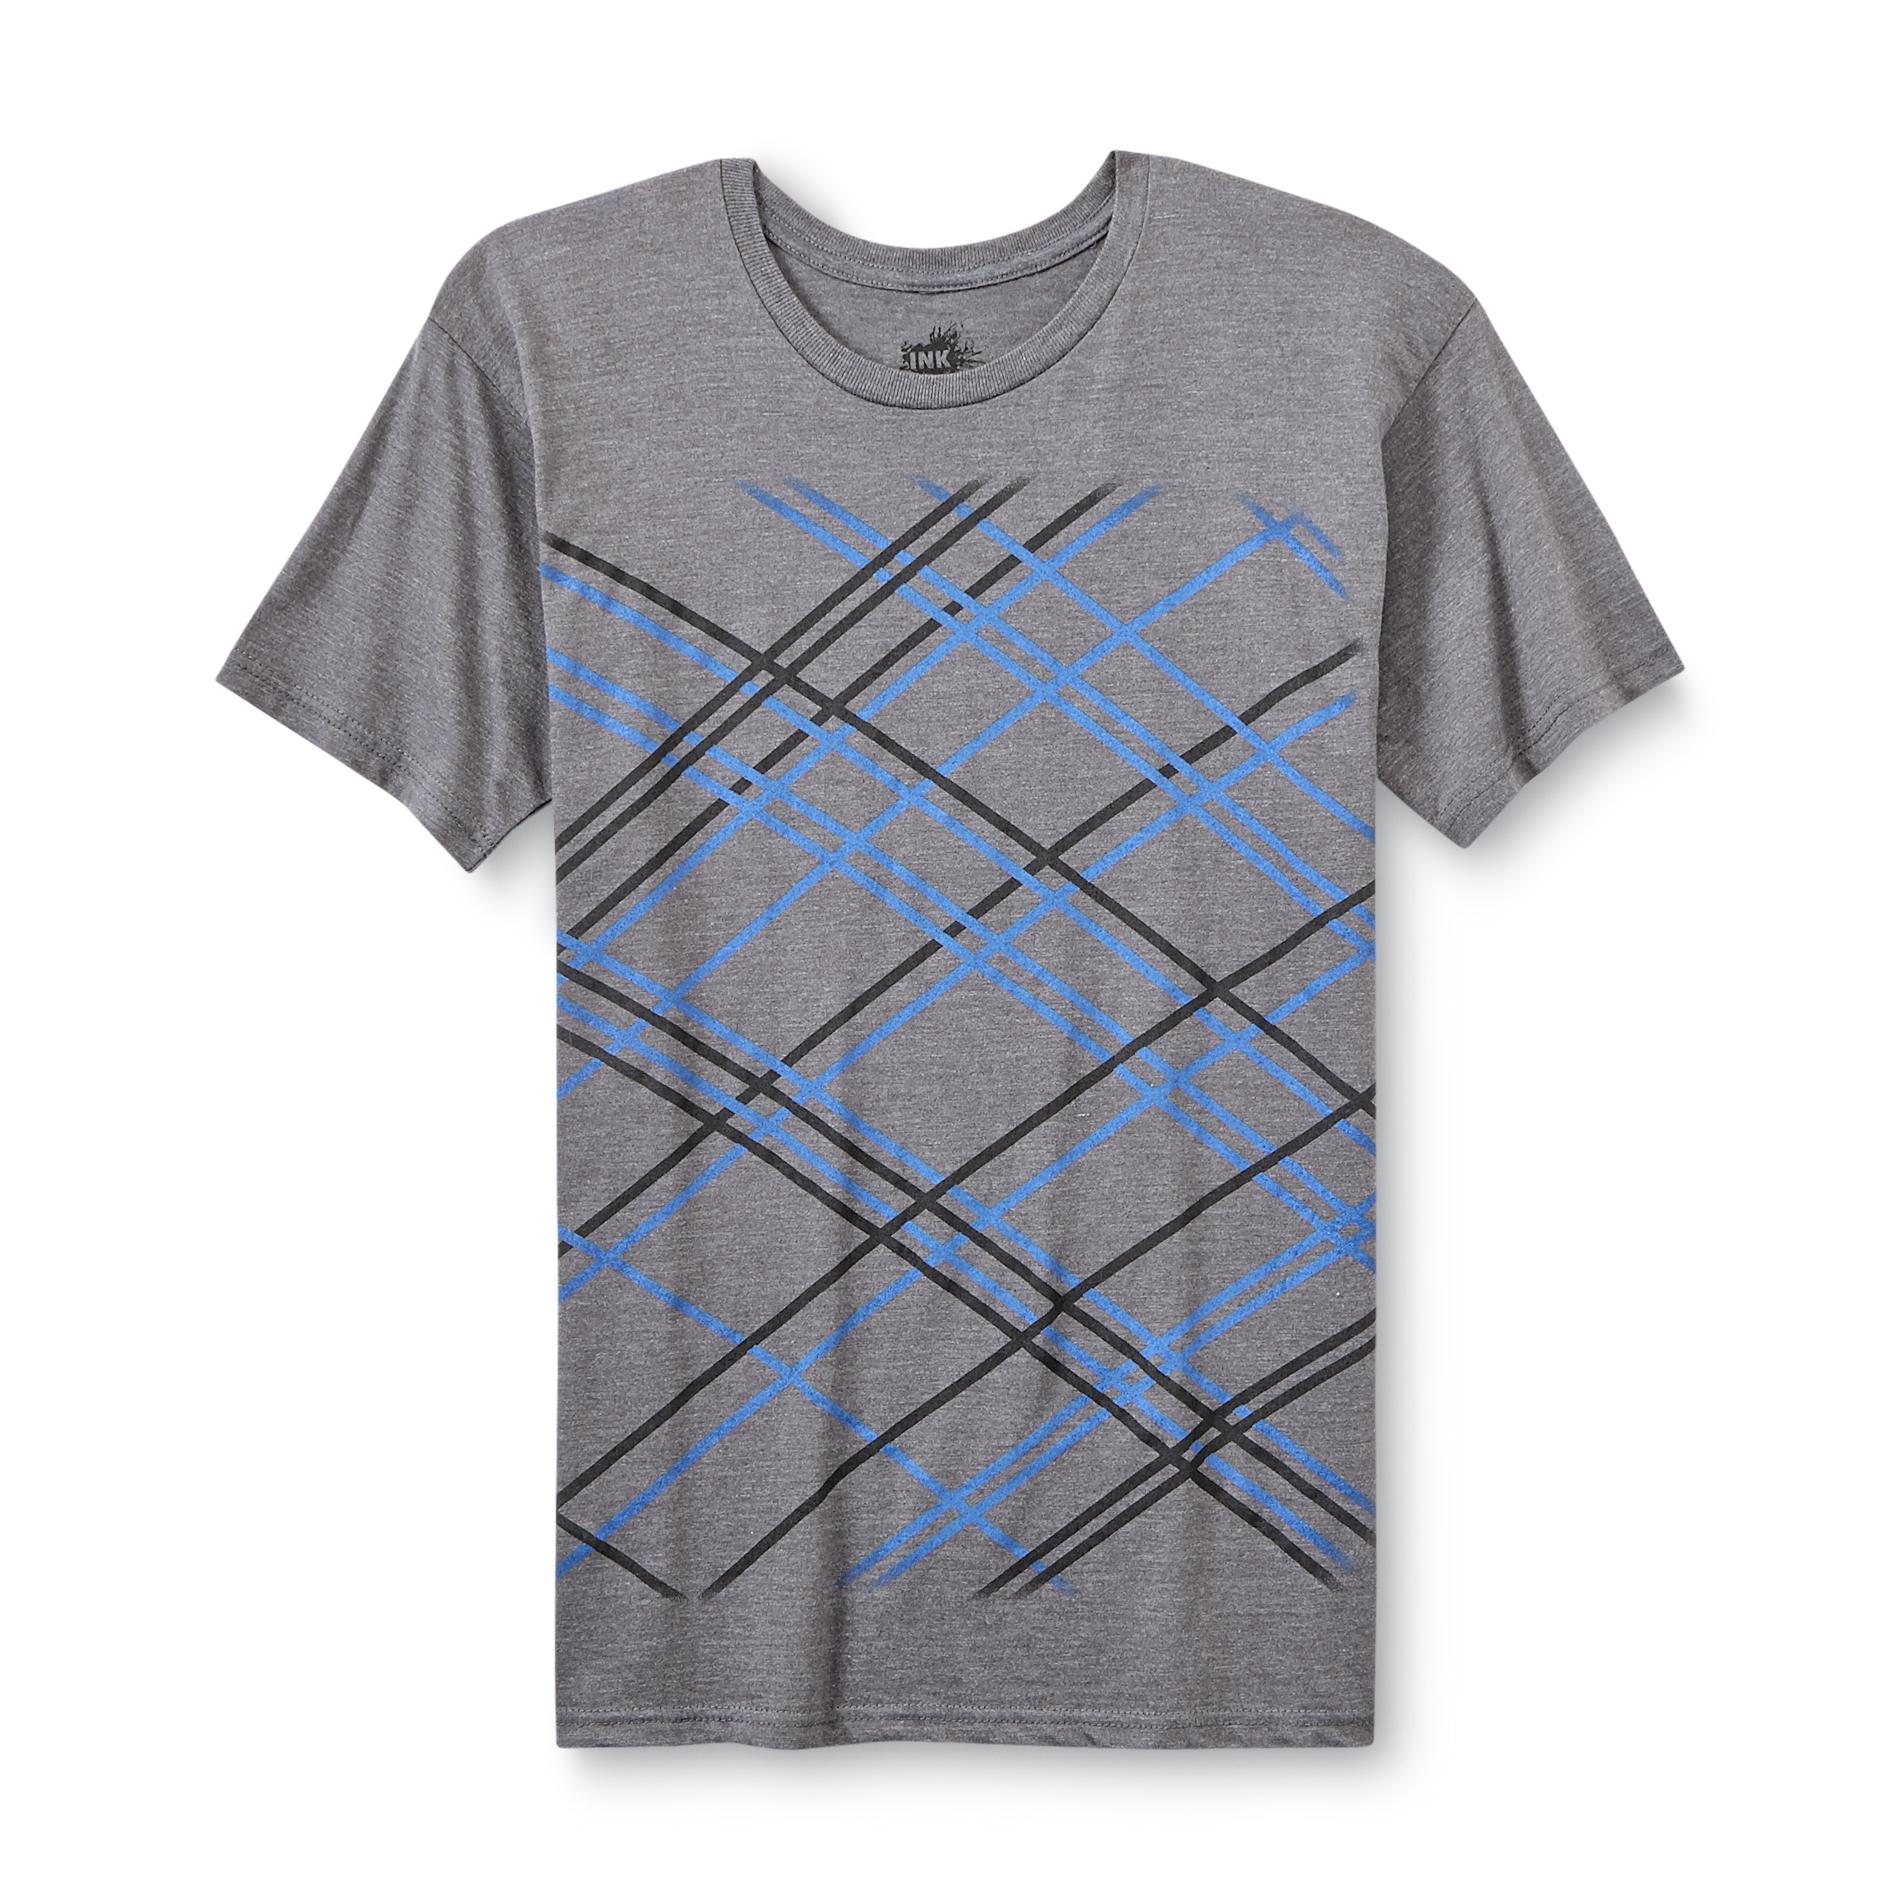 Ink Inc. Young Men's Graphic T-Shirt - Abstract Striped